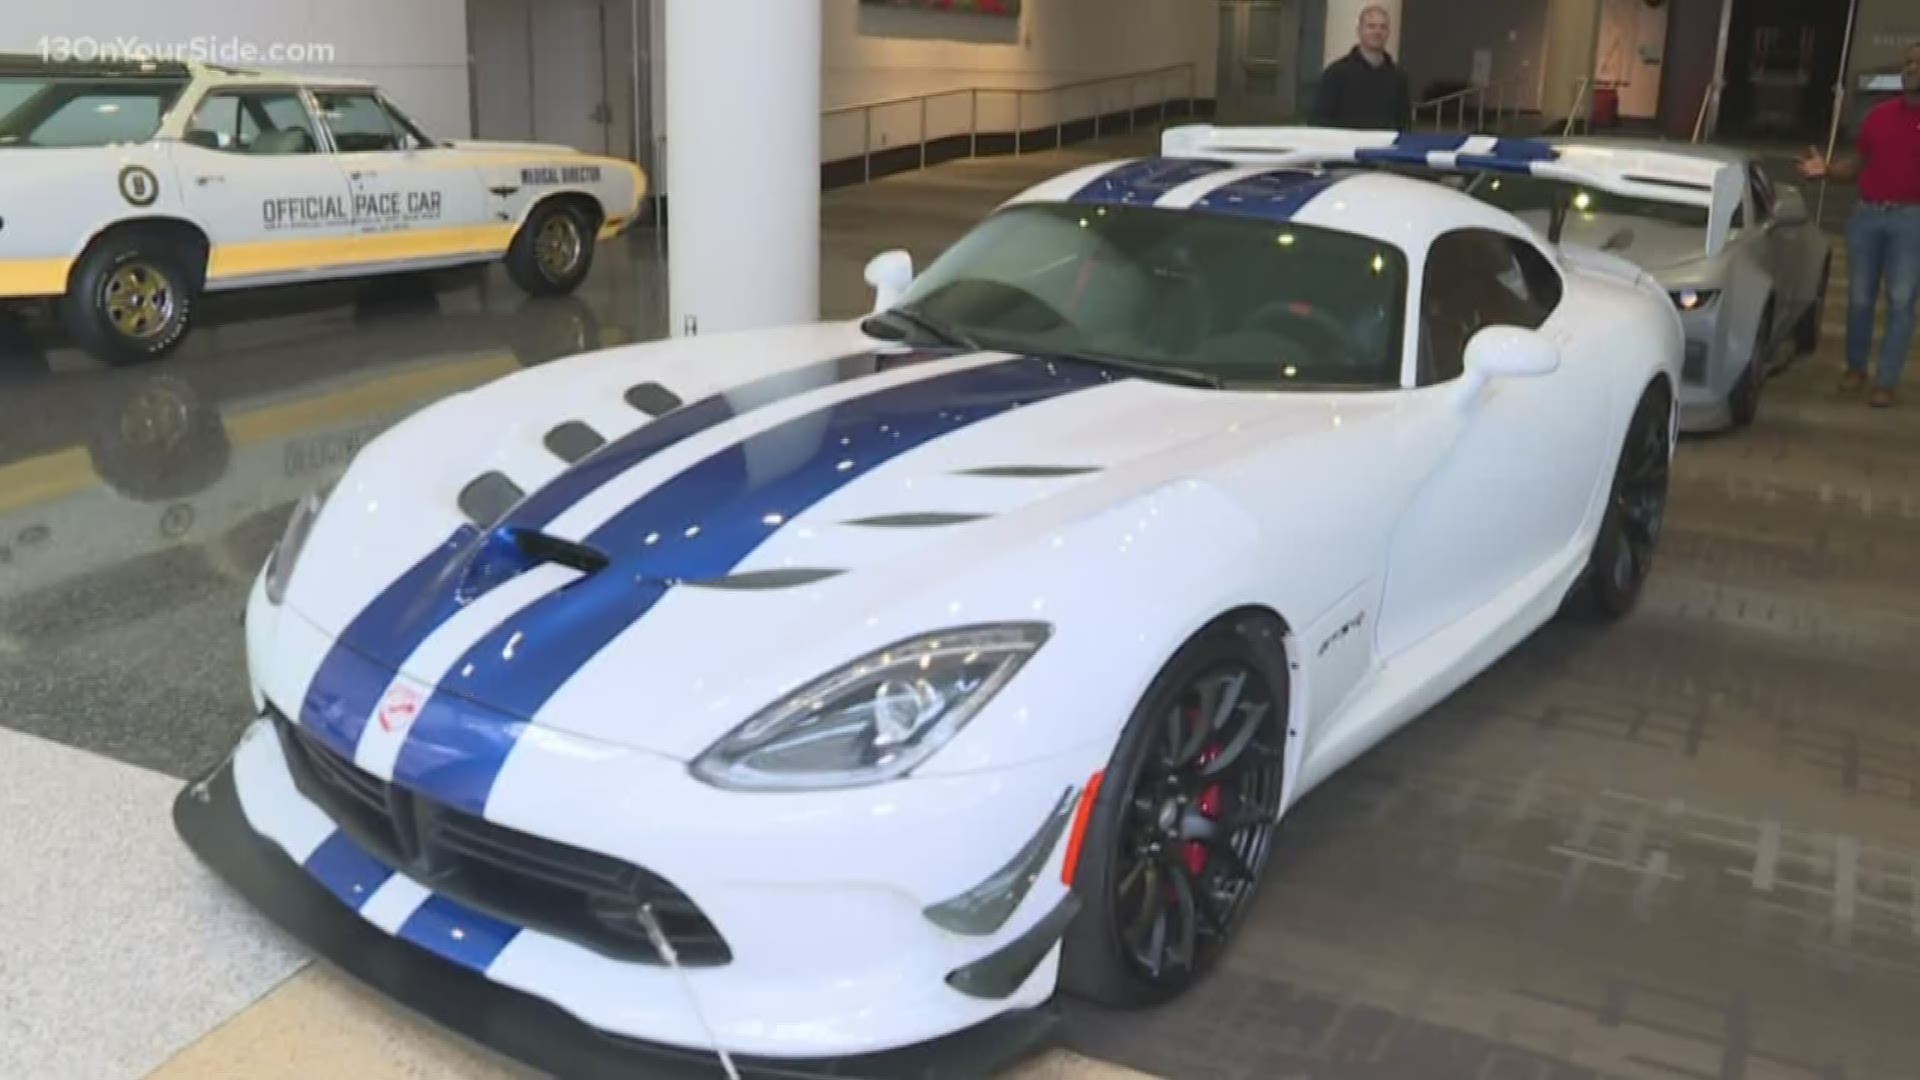 The Michigan International Auto Show kicks off Thursday, Jan. 30. There are custom, exotic and very expensive cars to check out.